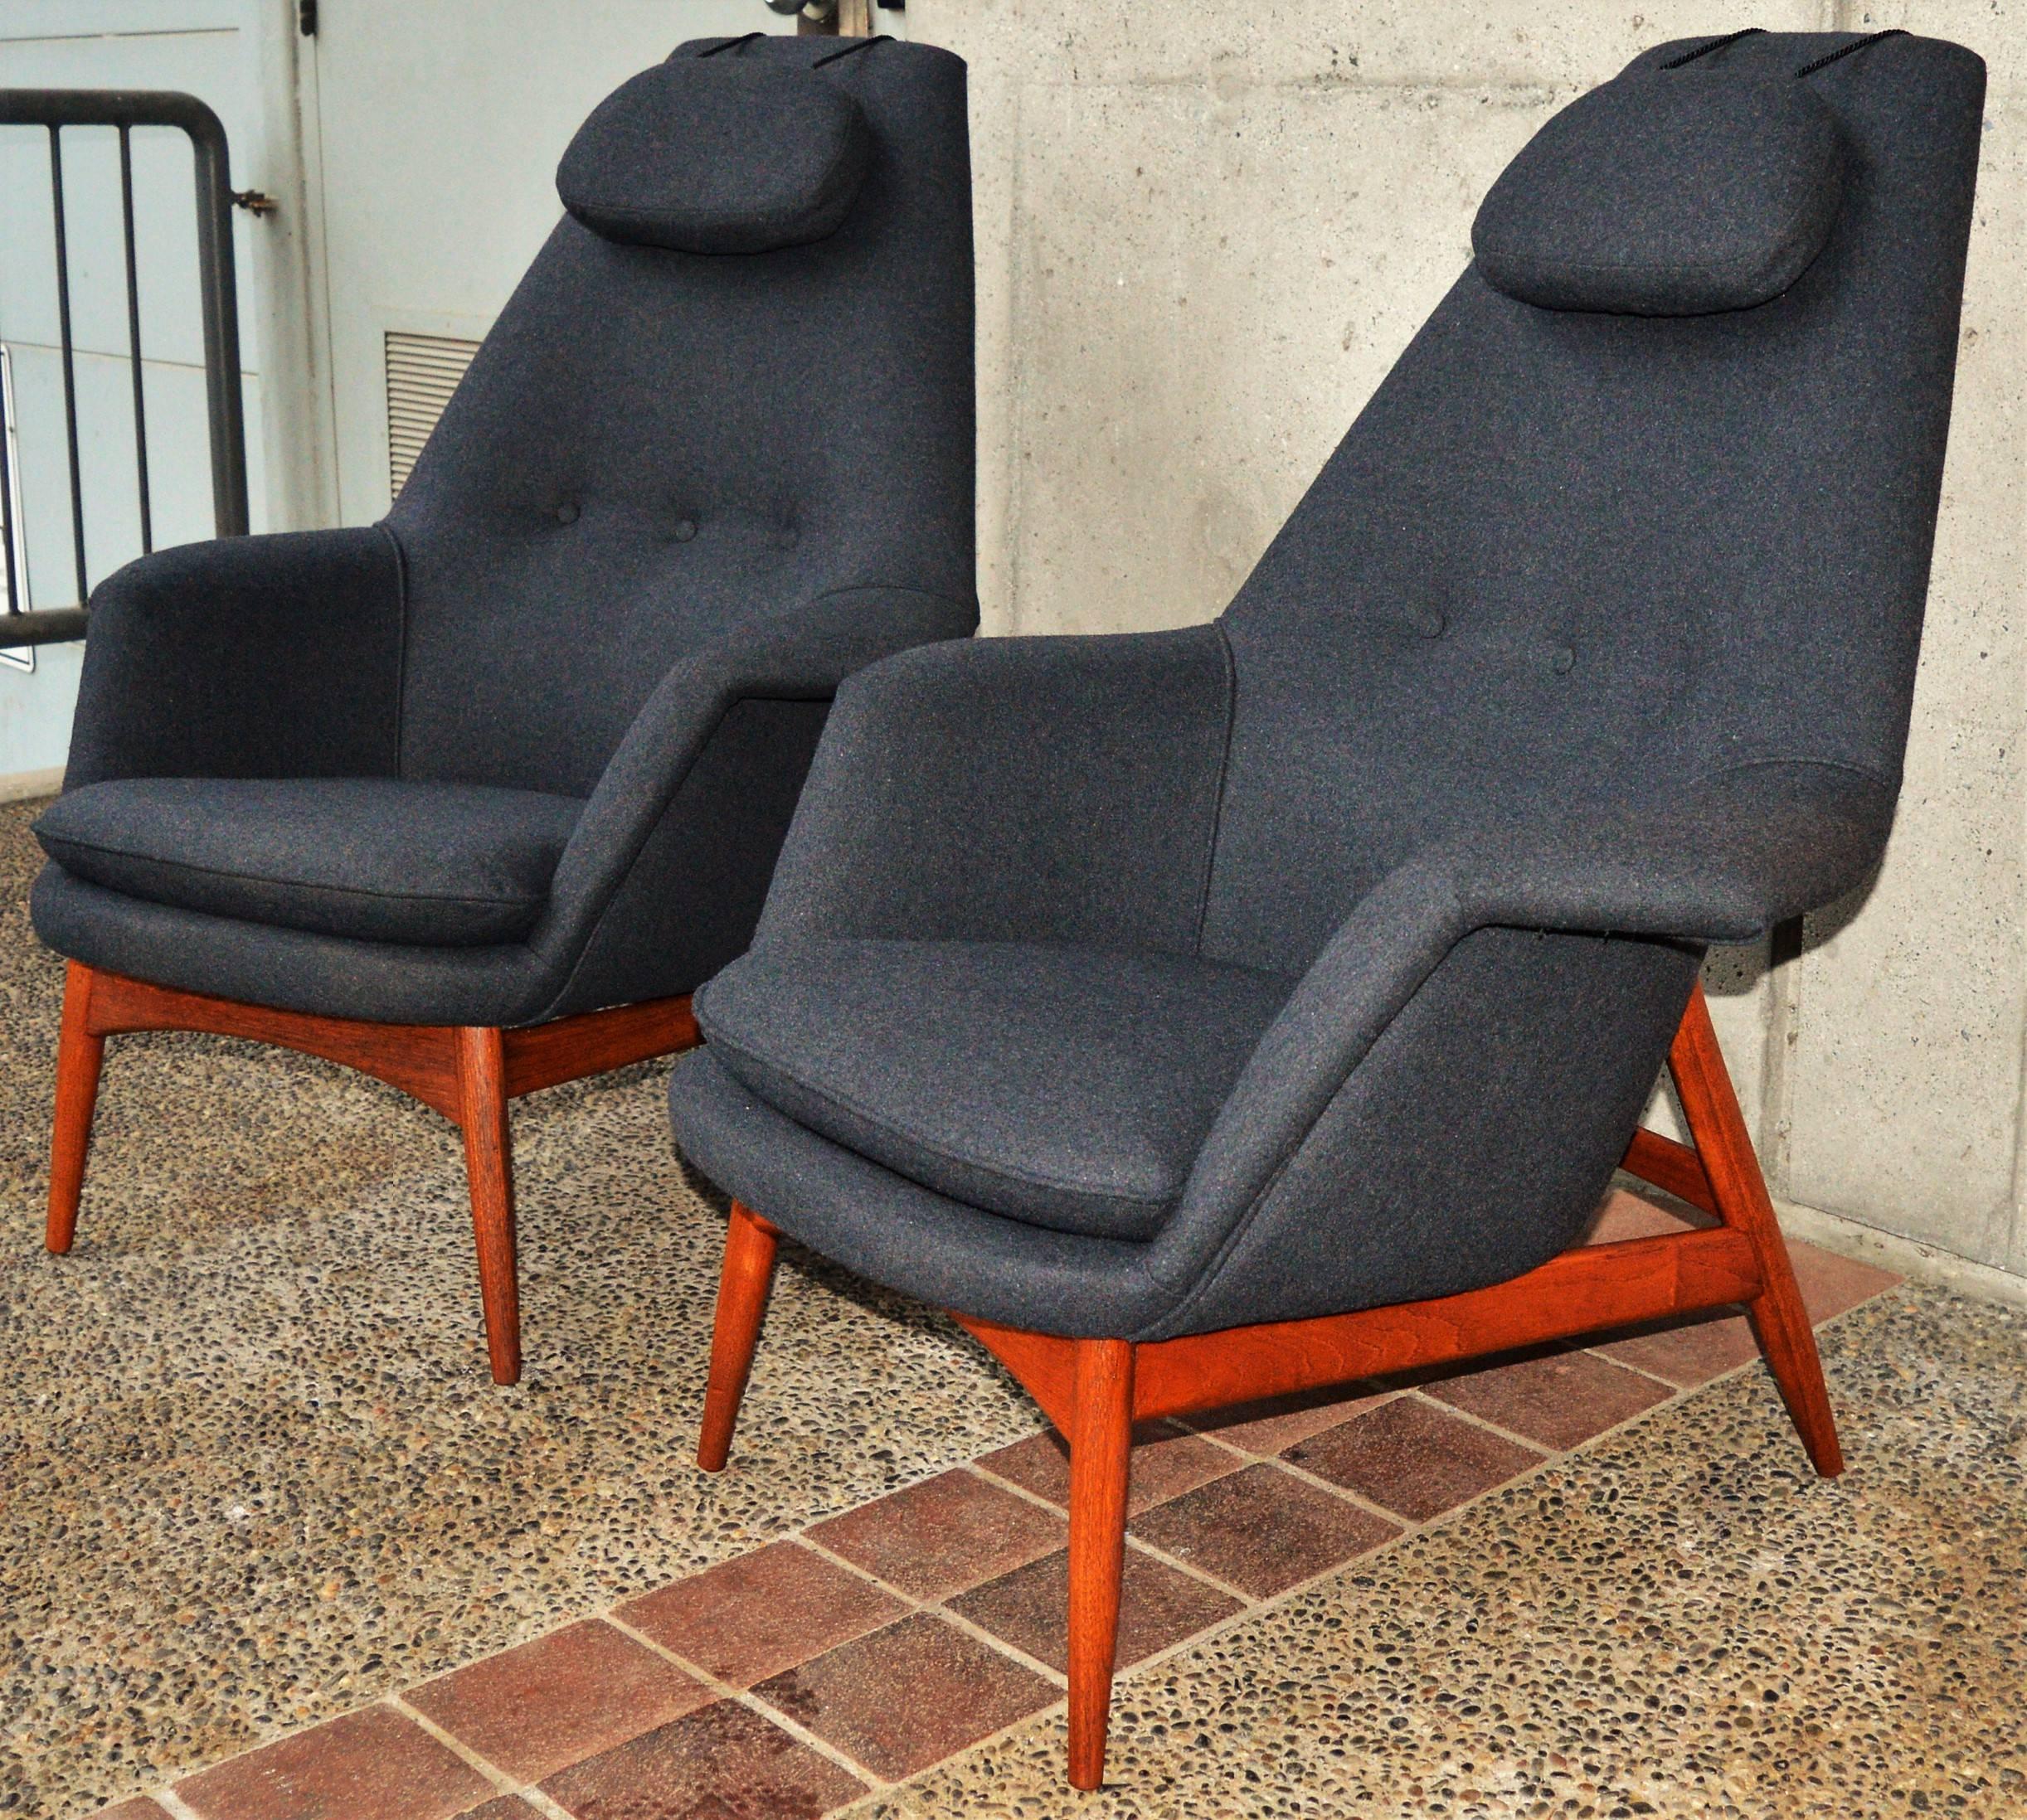 Mid-Century Modern Pair of Teak Manta Ray Chairs in Charcoal Wool by Bjorn Engo for DUX